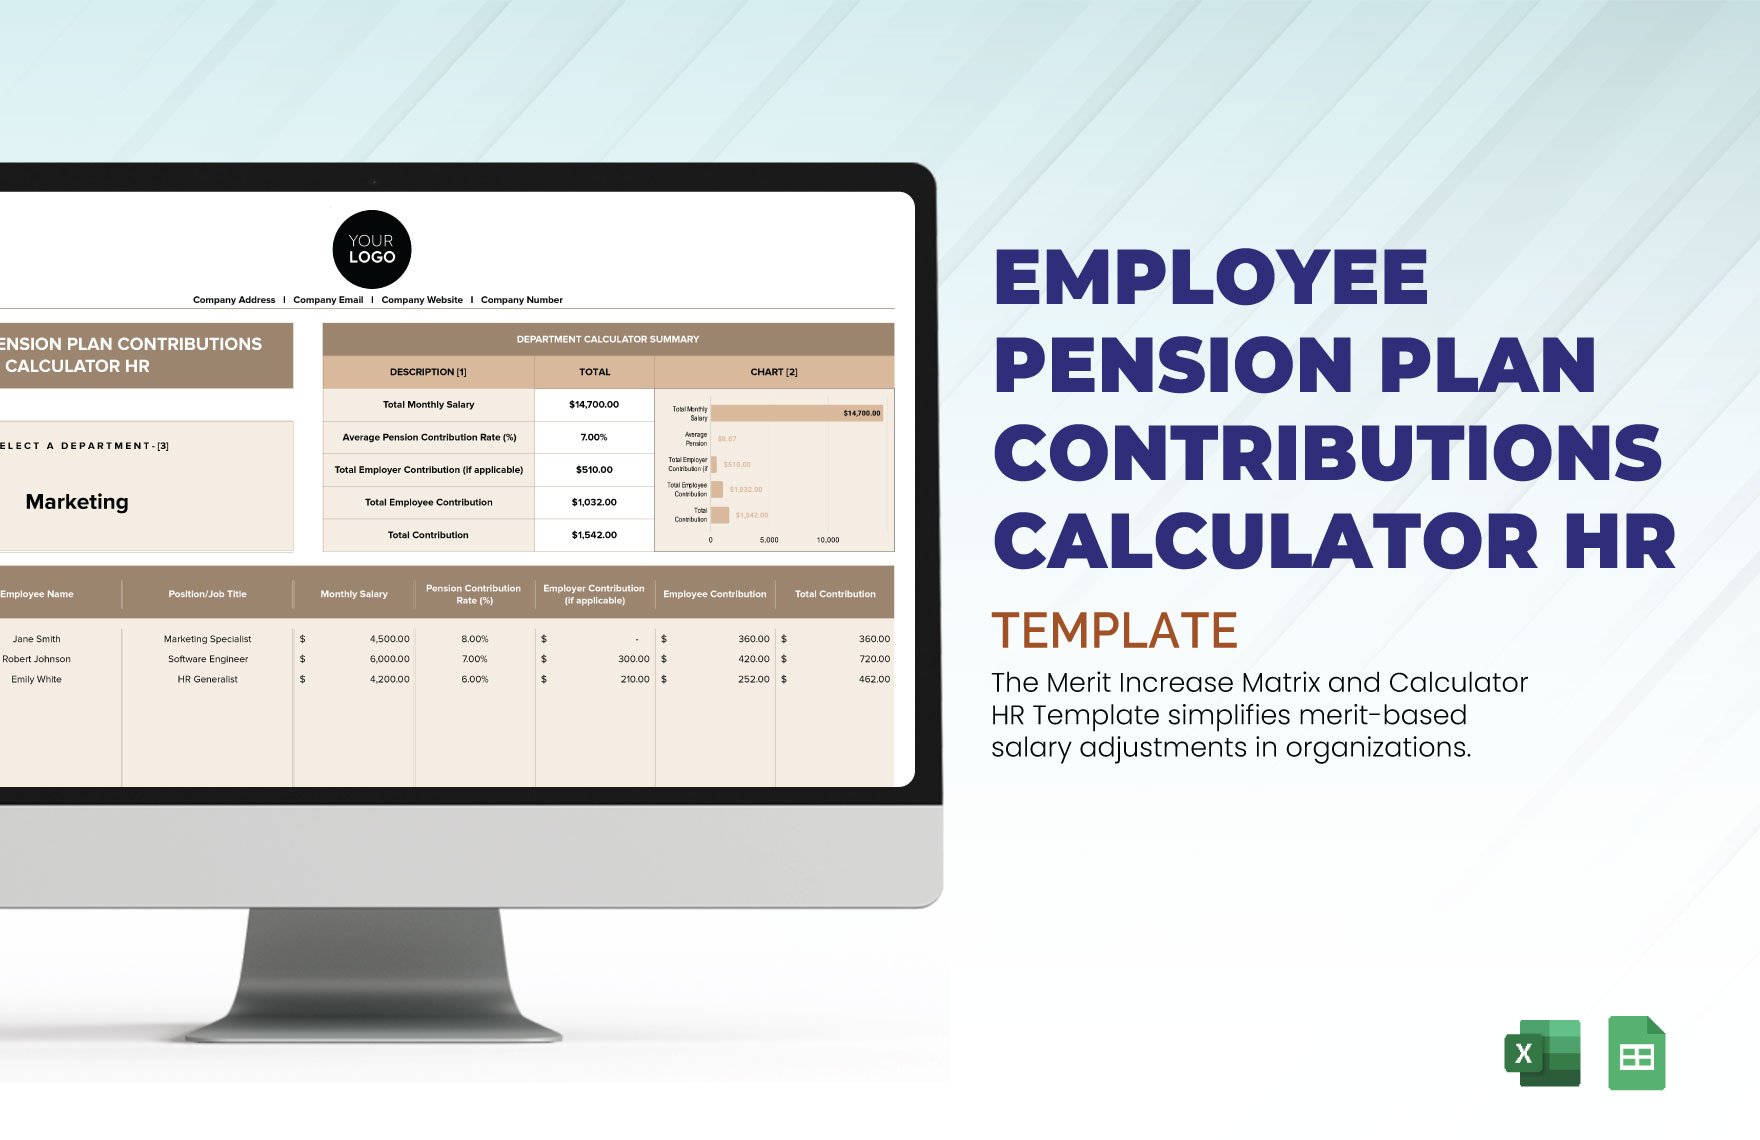 Employee Pension Plan Contributions Calculator HR Template